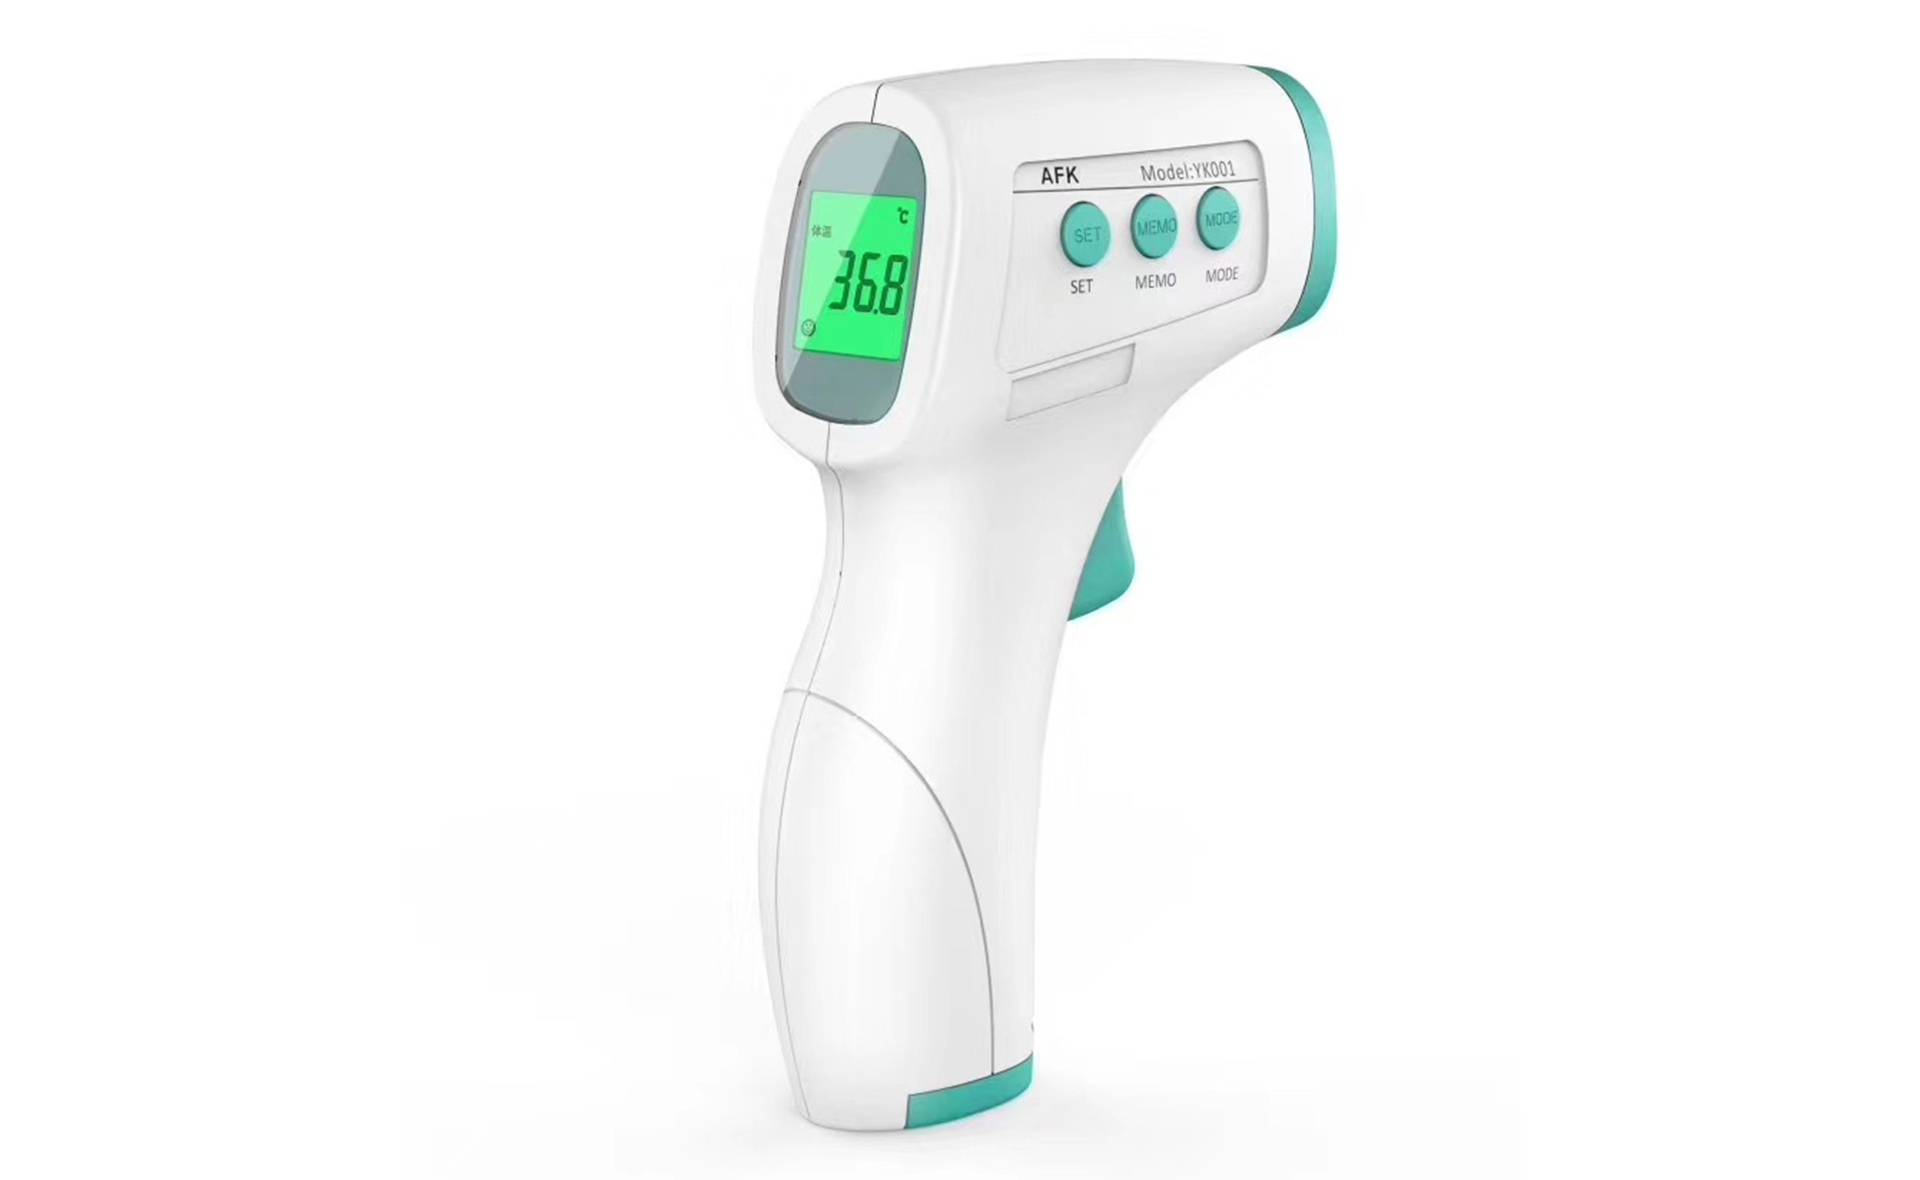 AFK Infrared Thermometer